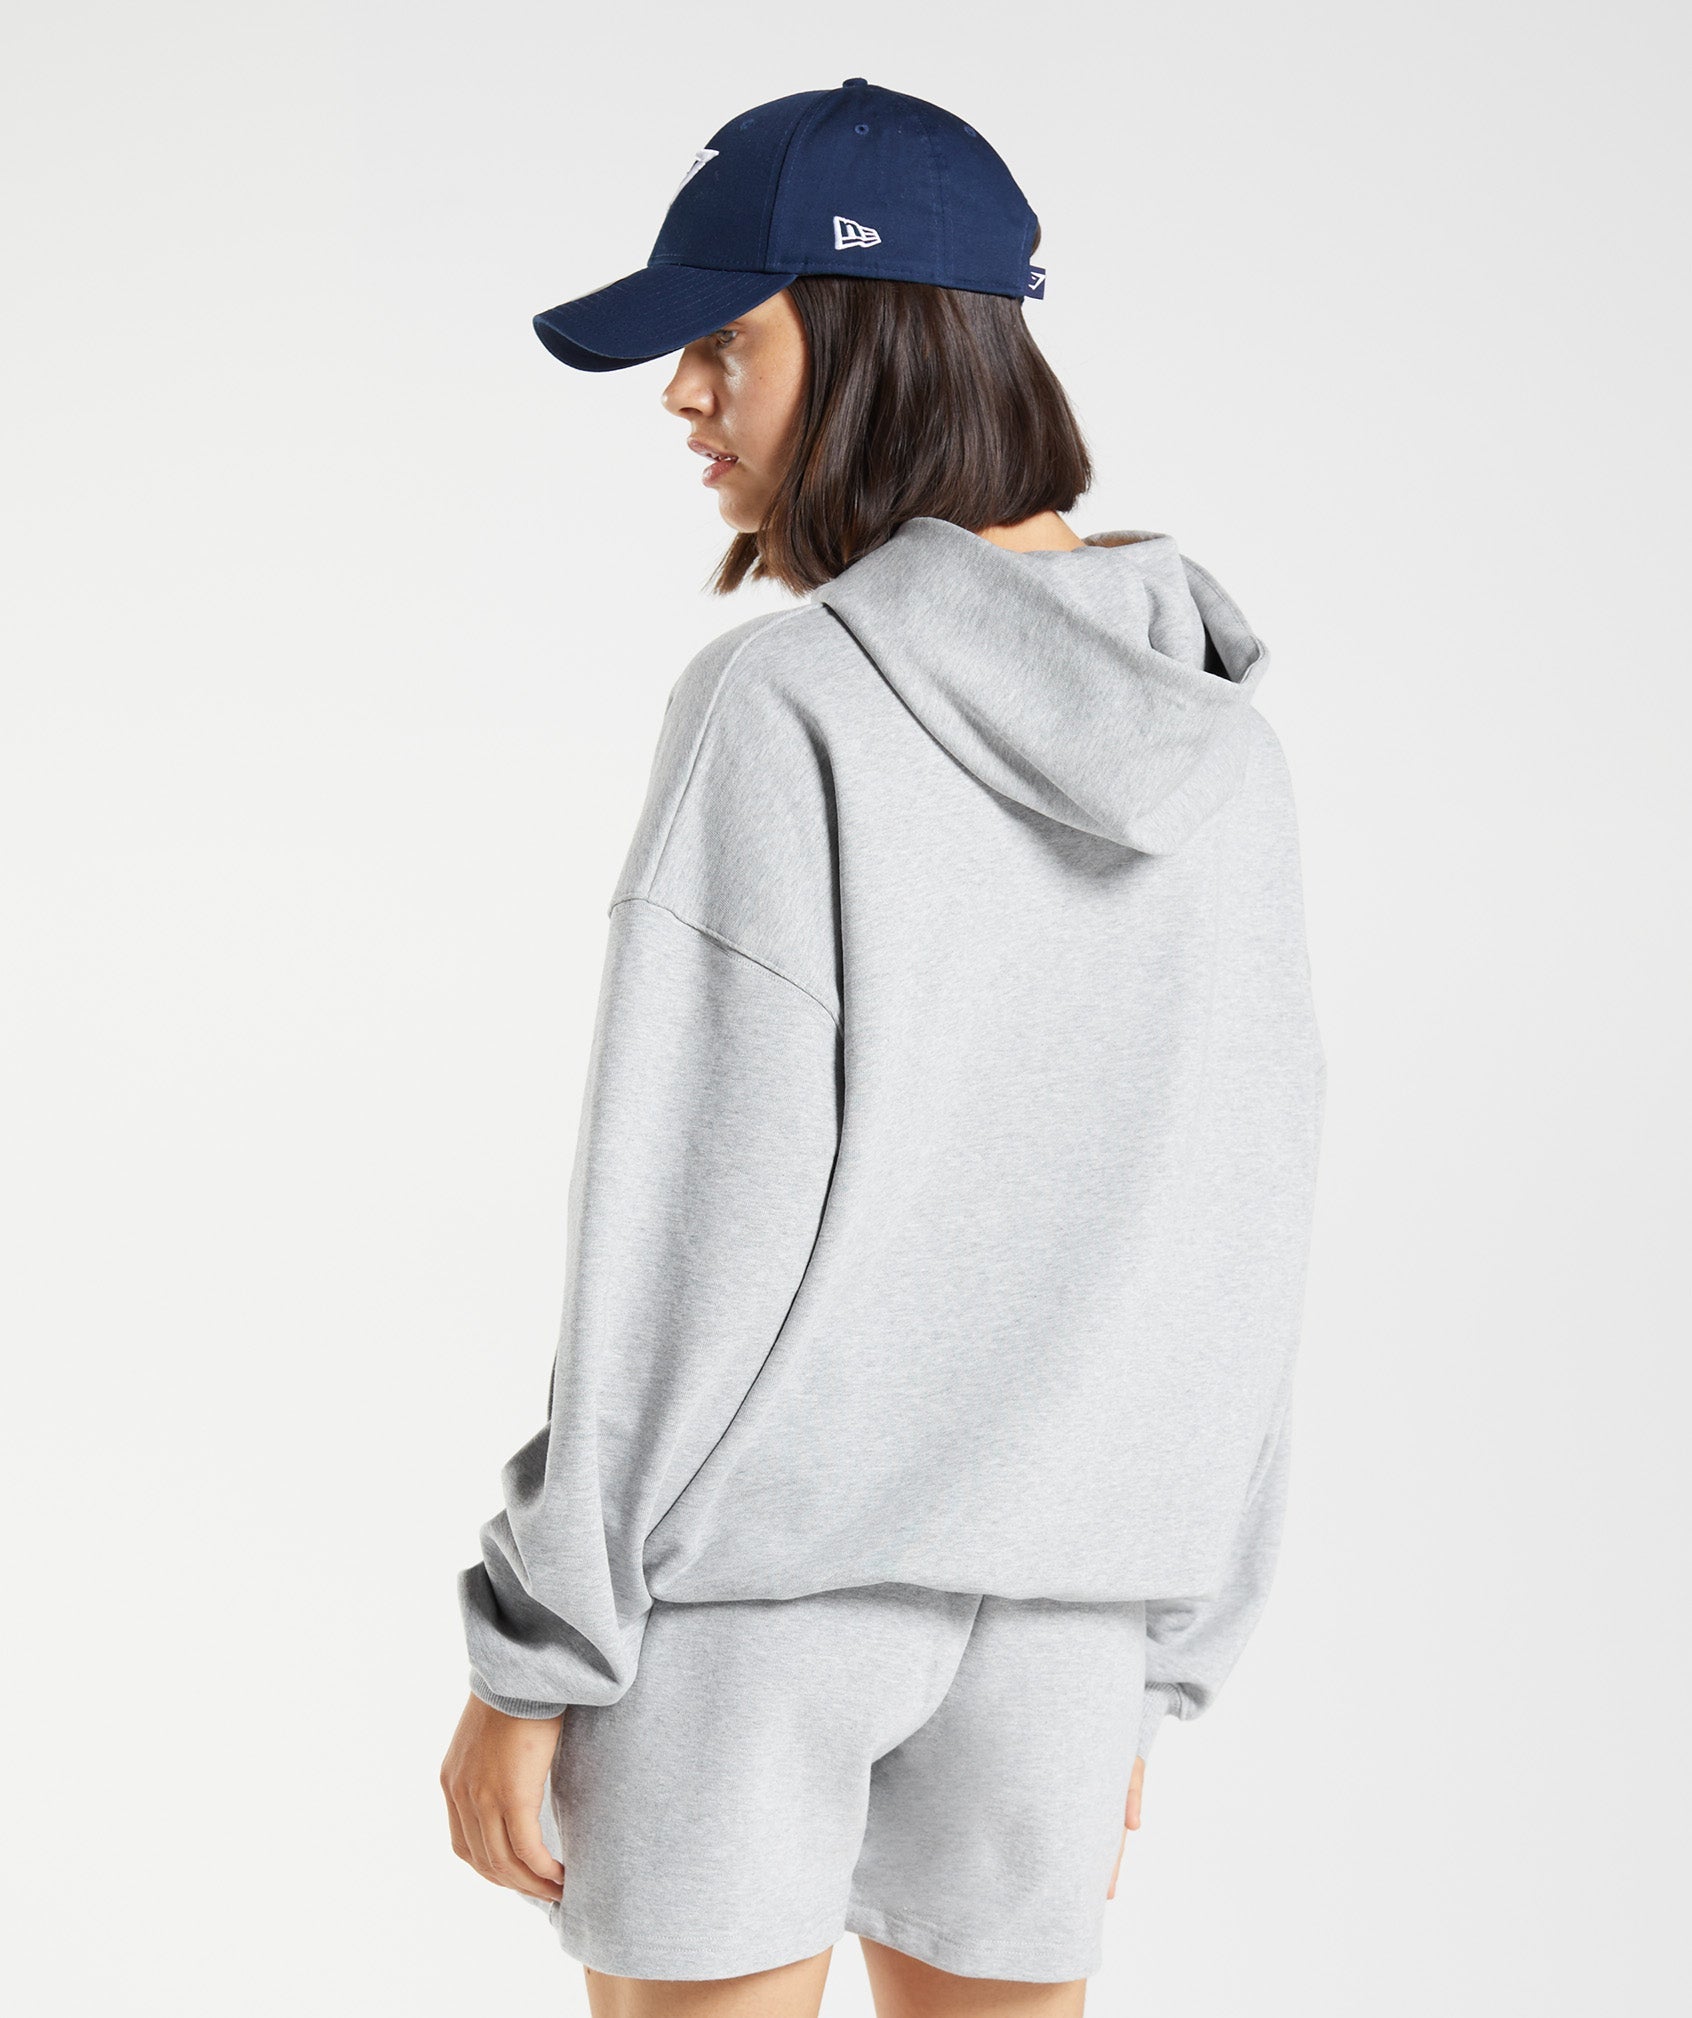 Rest Day Sweats Hoodie product image 2